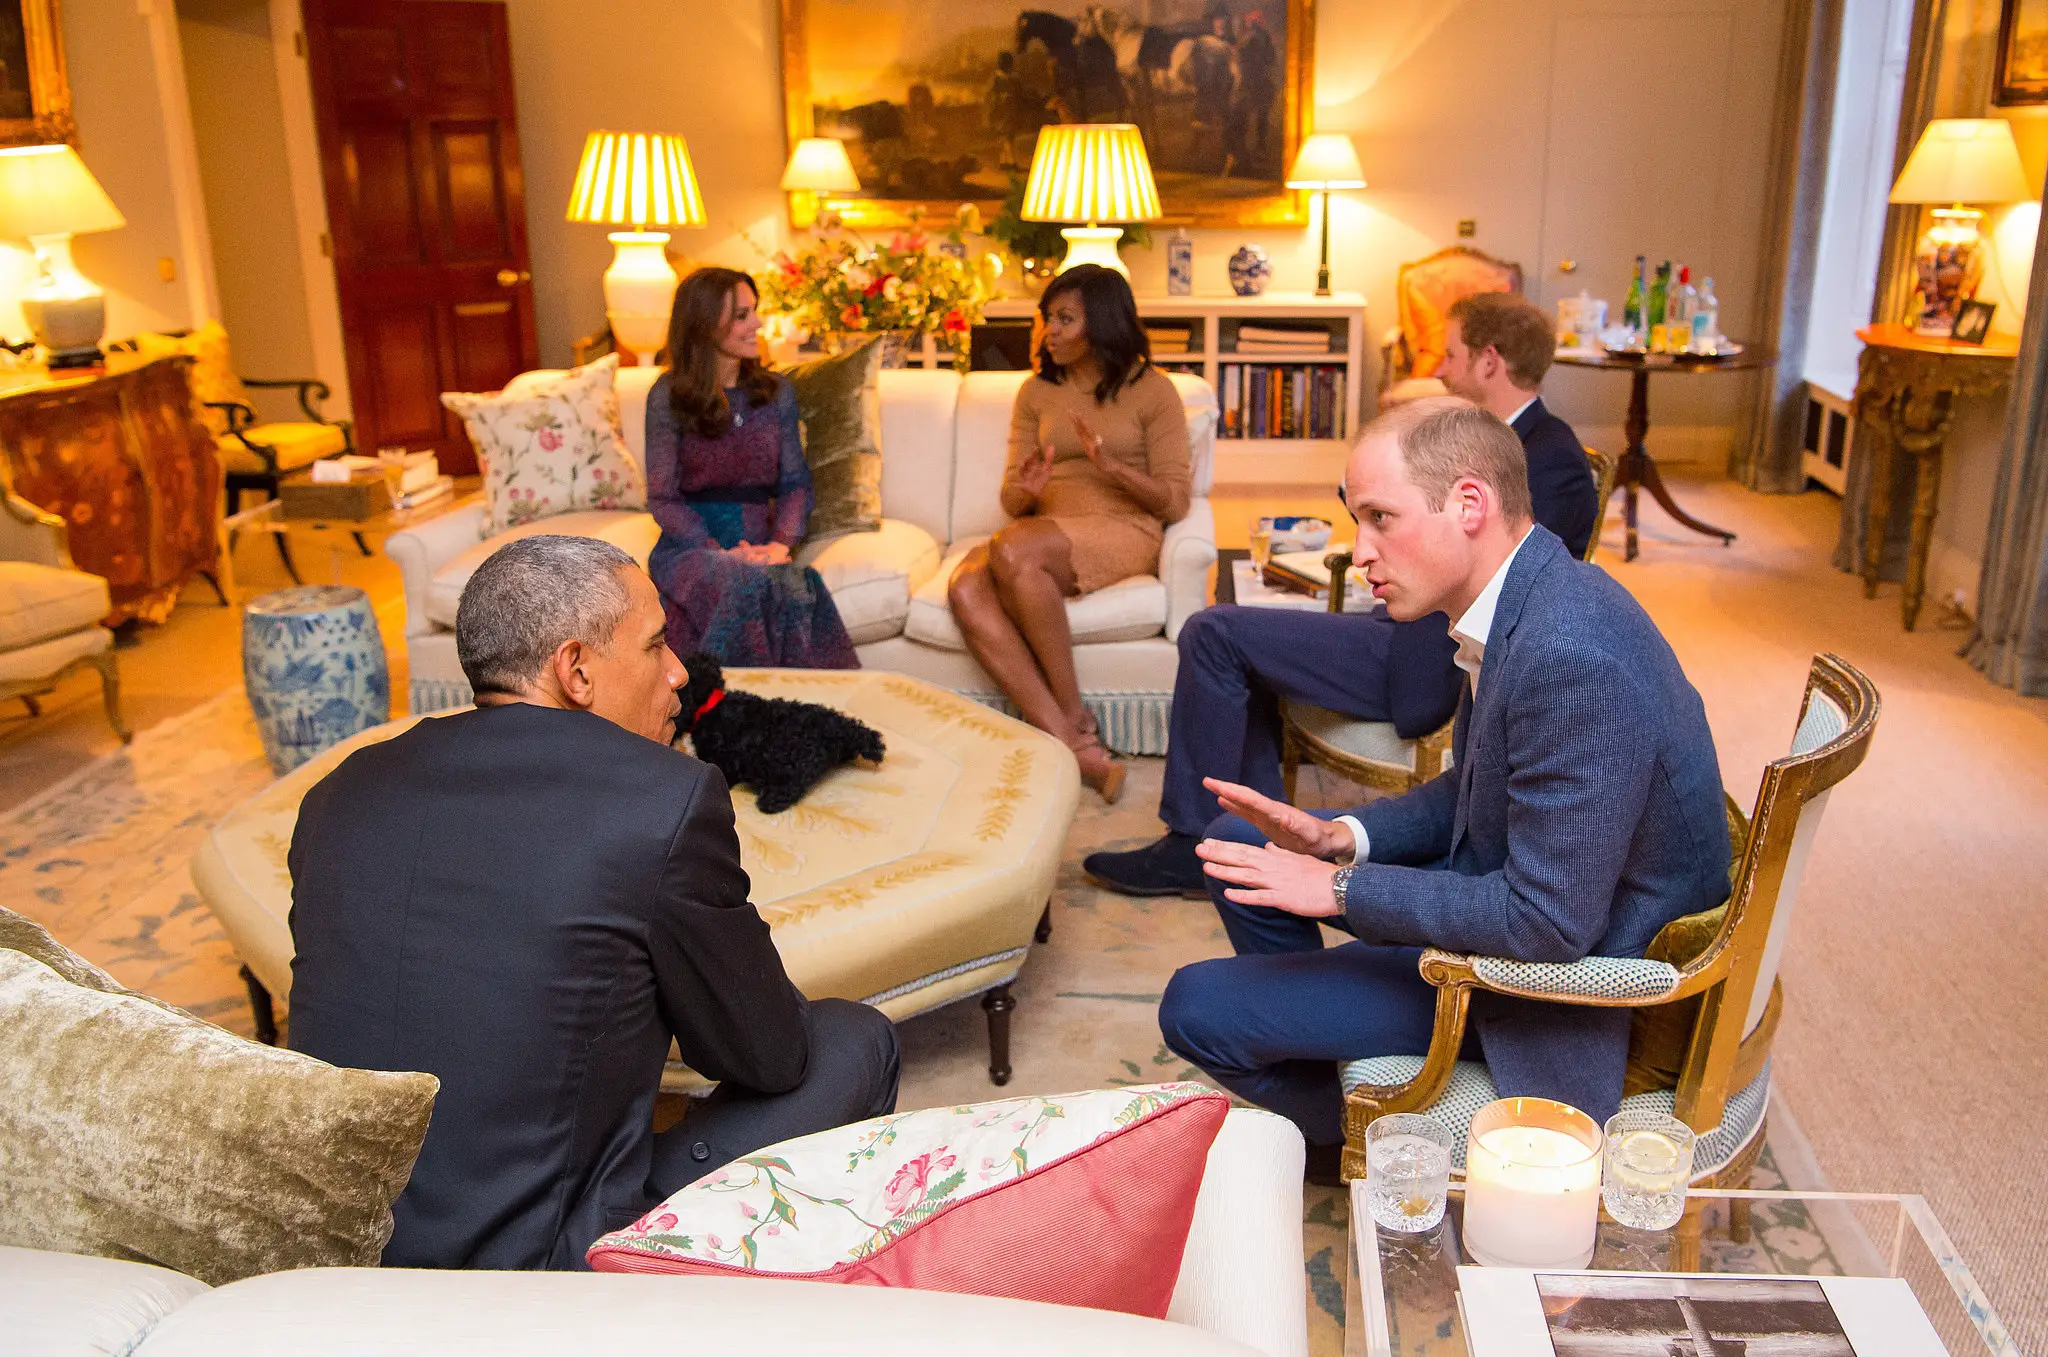 Duke and Duchess welcomed Obamas at Palace